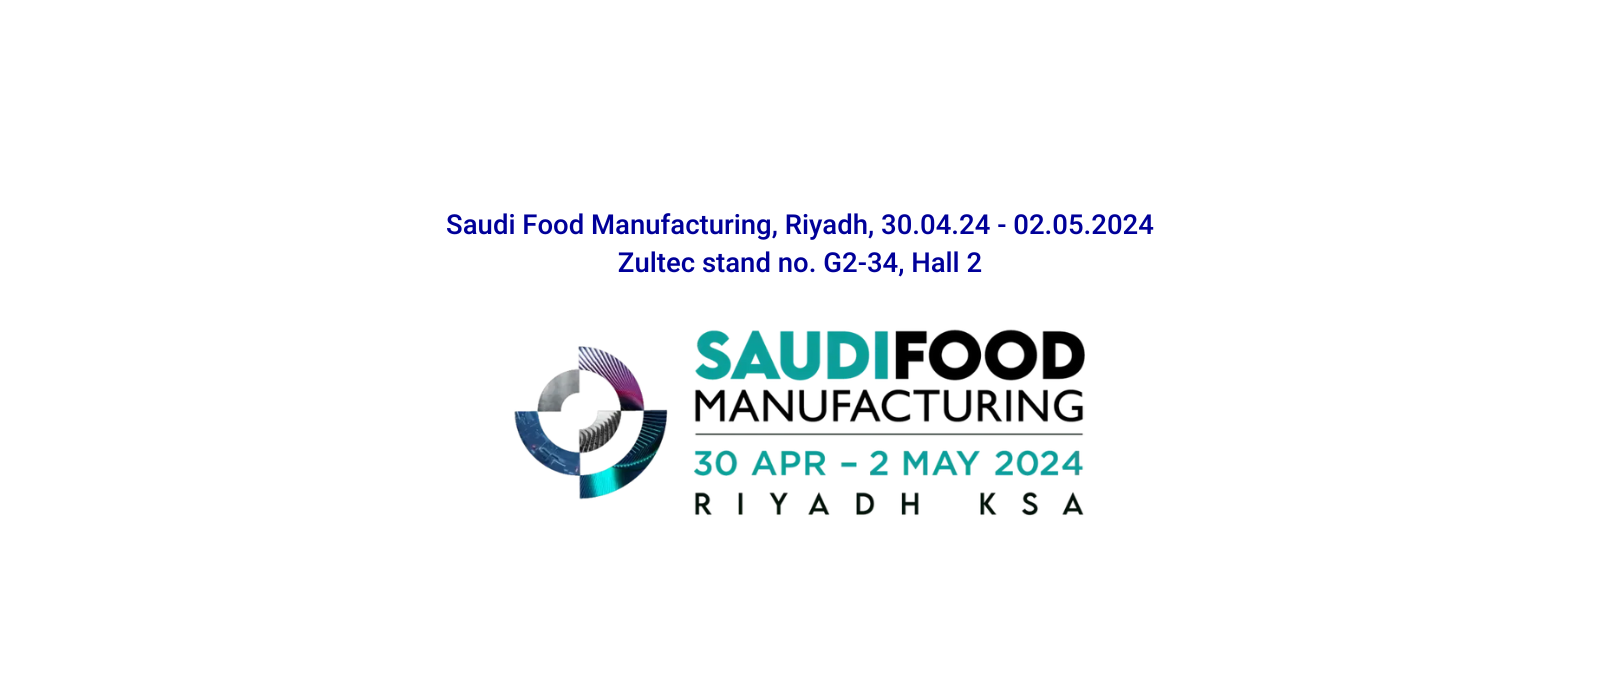 Saudi Food Manufacturing: a new appointment for Fabbri Group